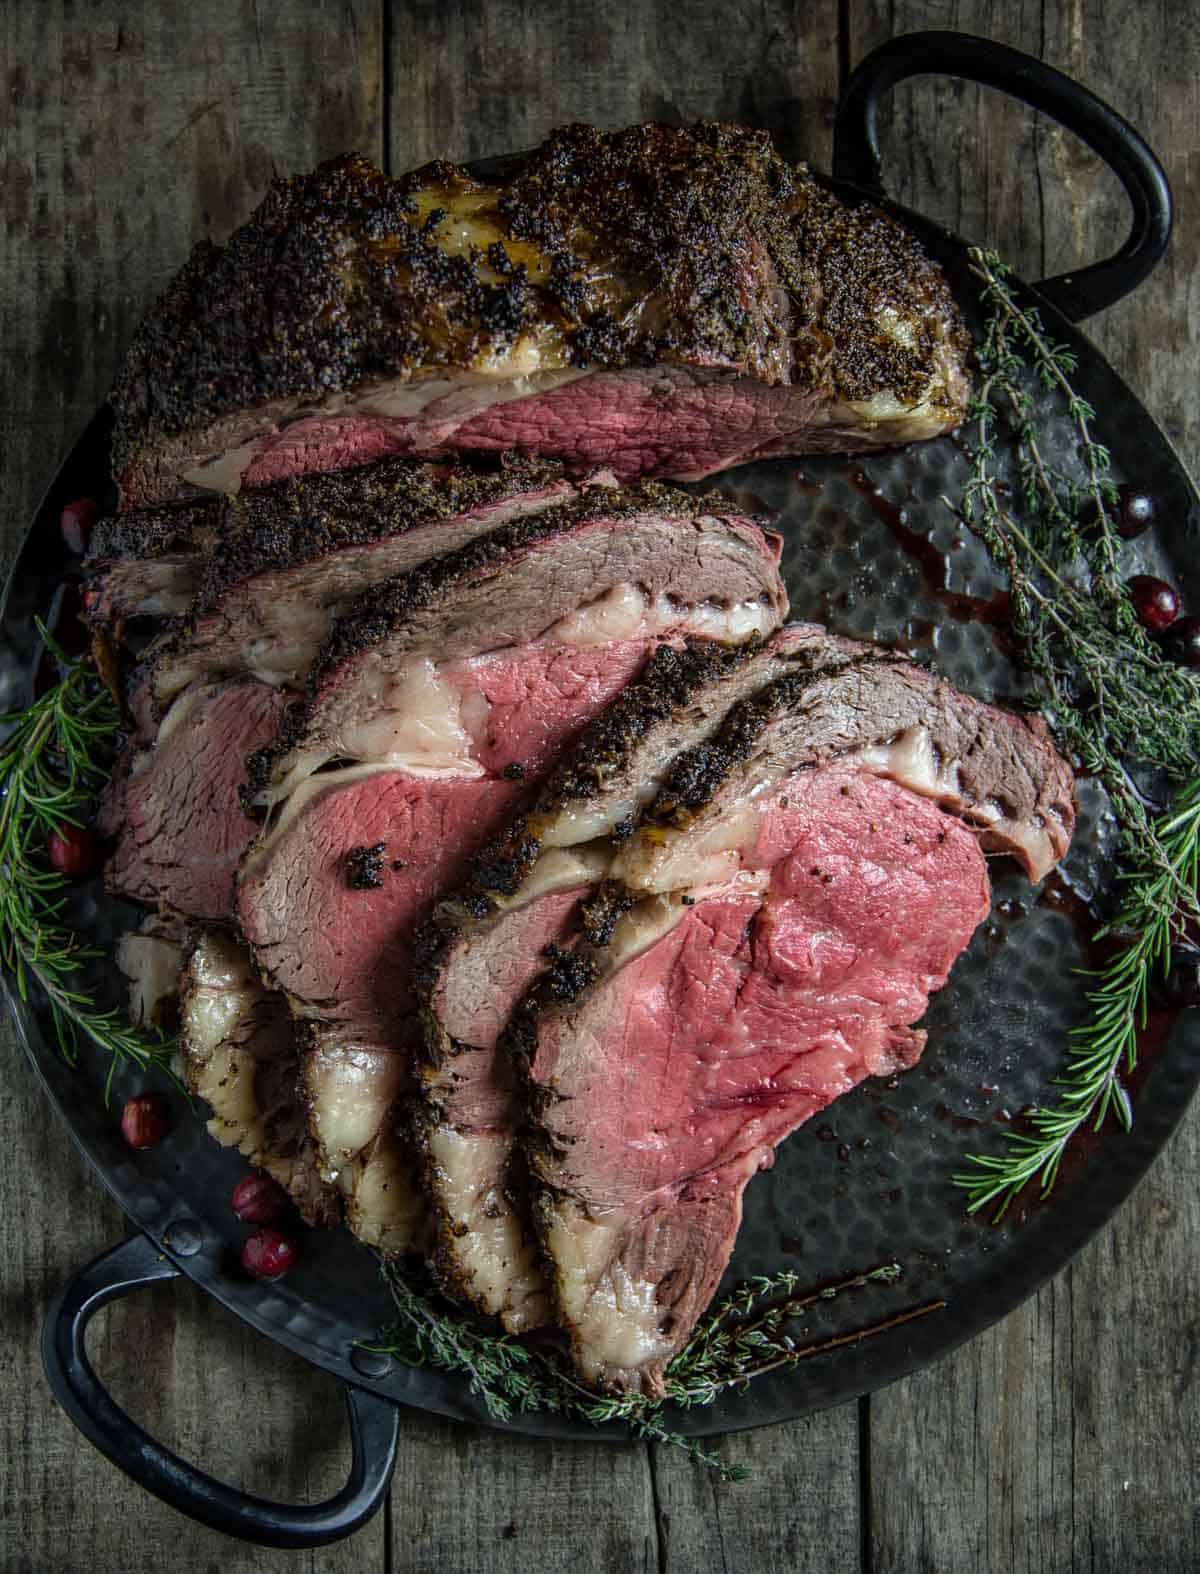 https://www.vindulge.com/wp-content/uploads/2022/09/Smoked-Prime-Rib-with-Herb-Crust-on-a-platter.jpg